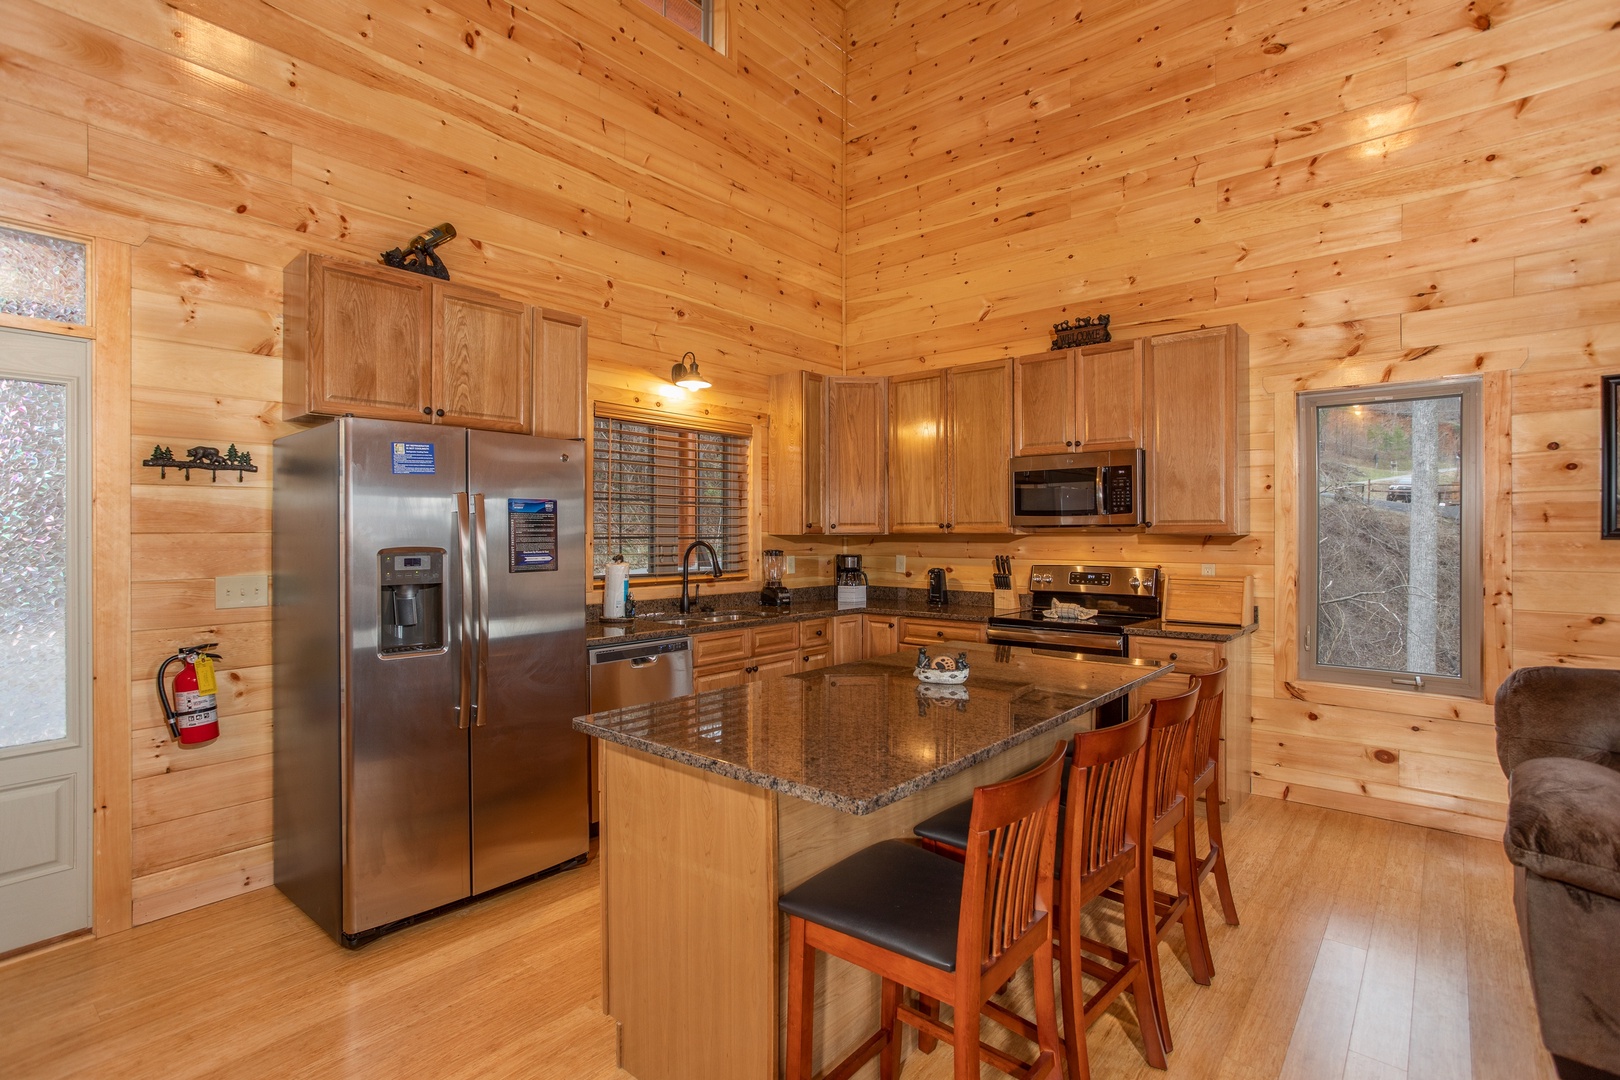 Kitchen with stainless appliances and breakfast bar at Happy Bear's Hideaway, a 2 bedroom cabin rental located in Gatlinburg